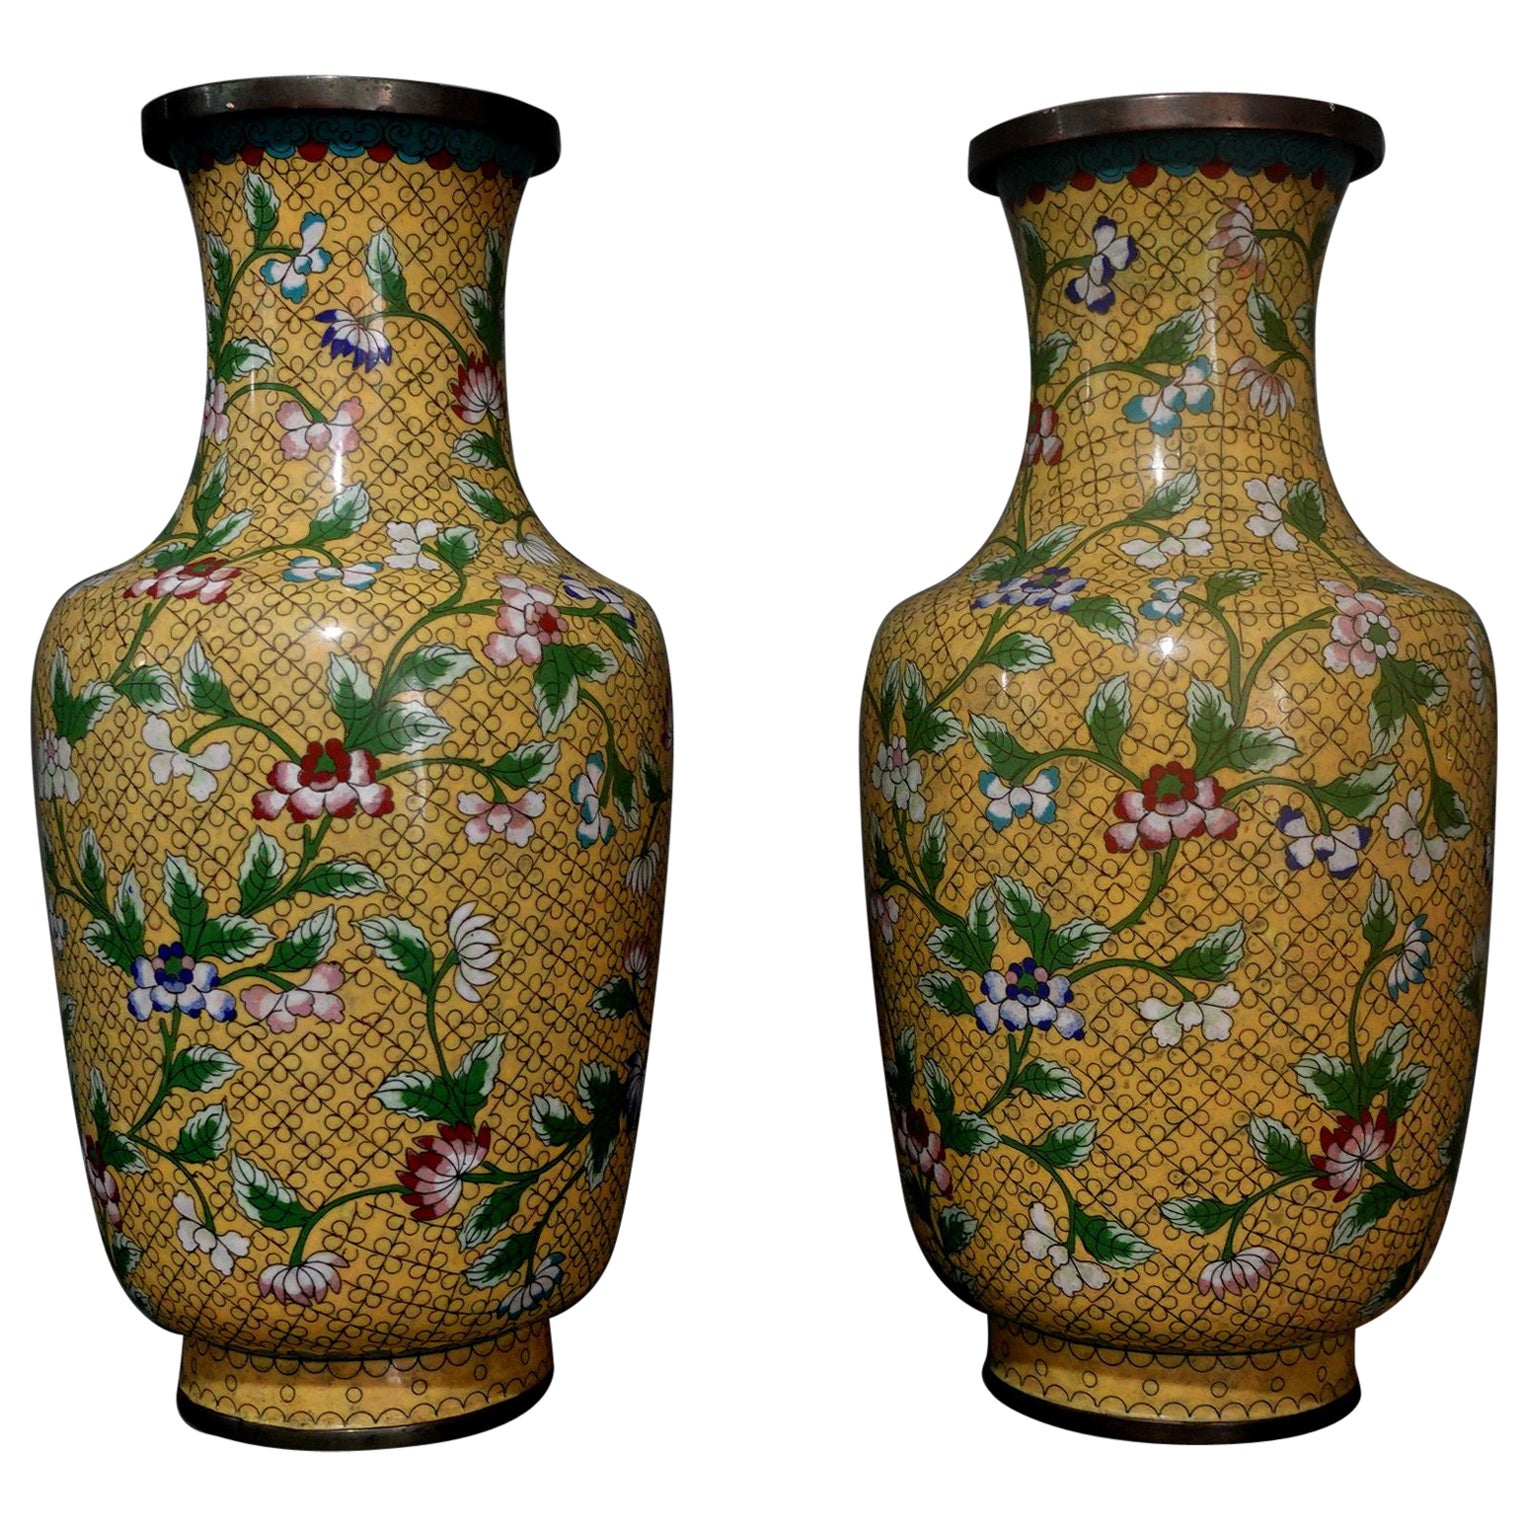 Large Pair of Chinese Bronze Cloisonné Enameled Vases